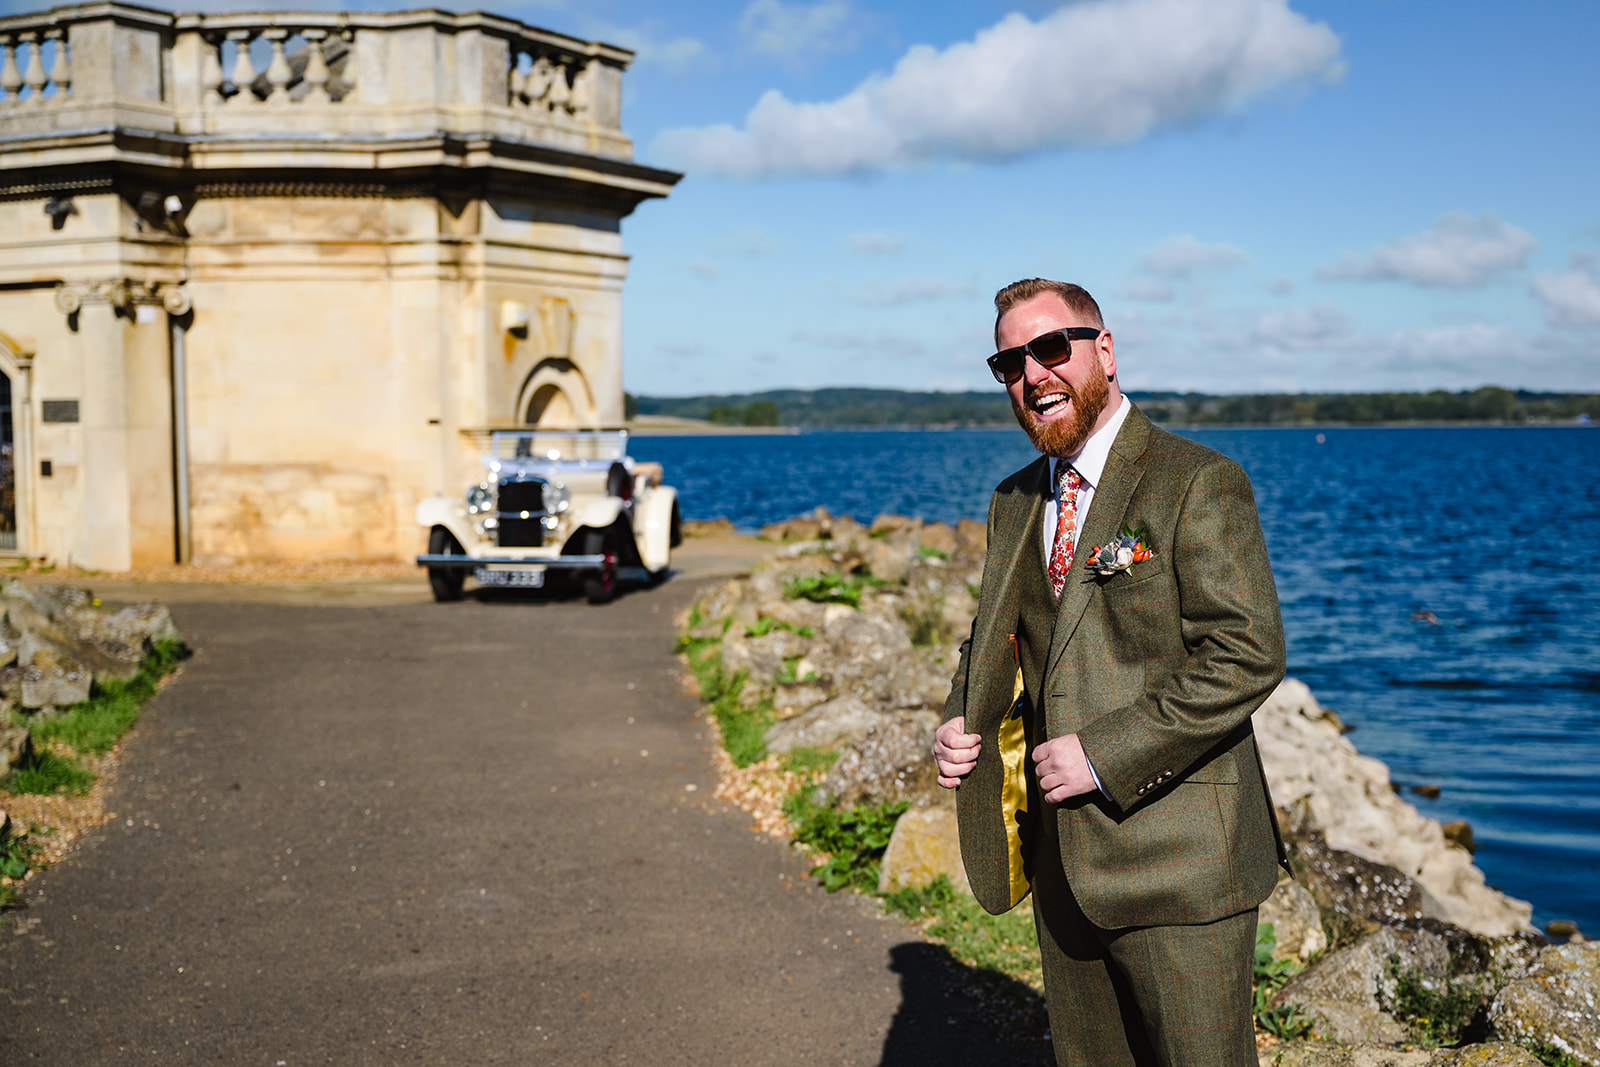 Groom waiting outside Normanton church for his bride to arrive